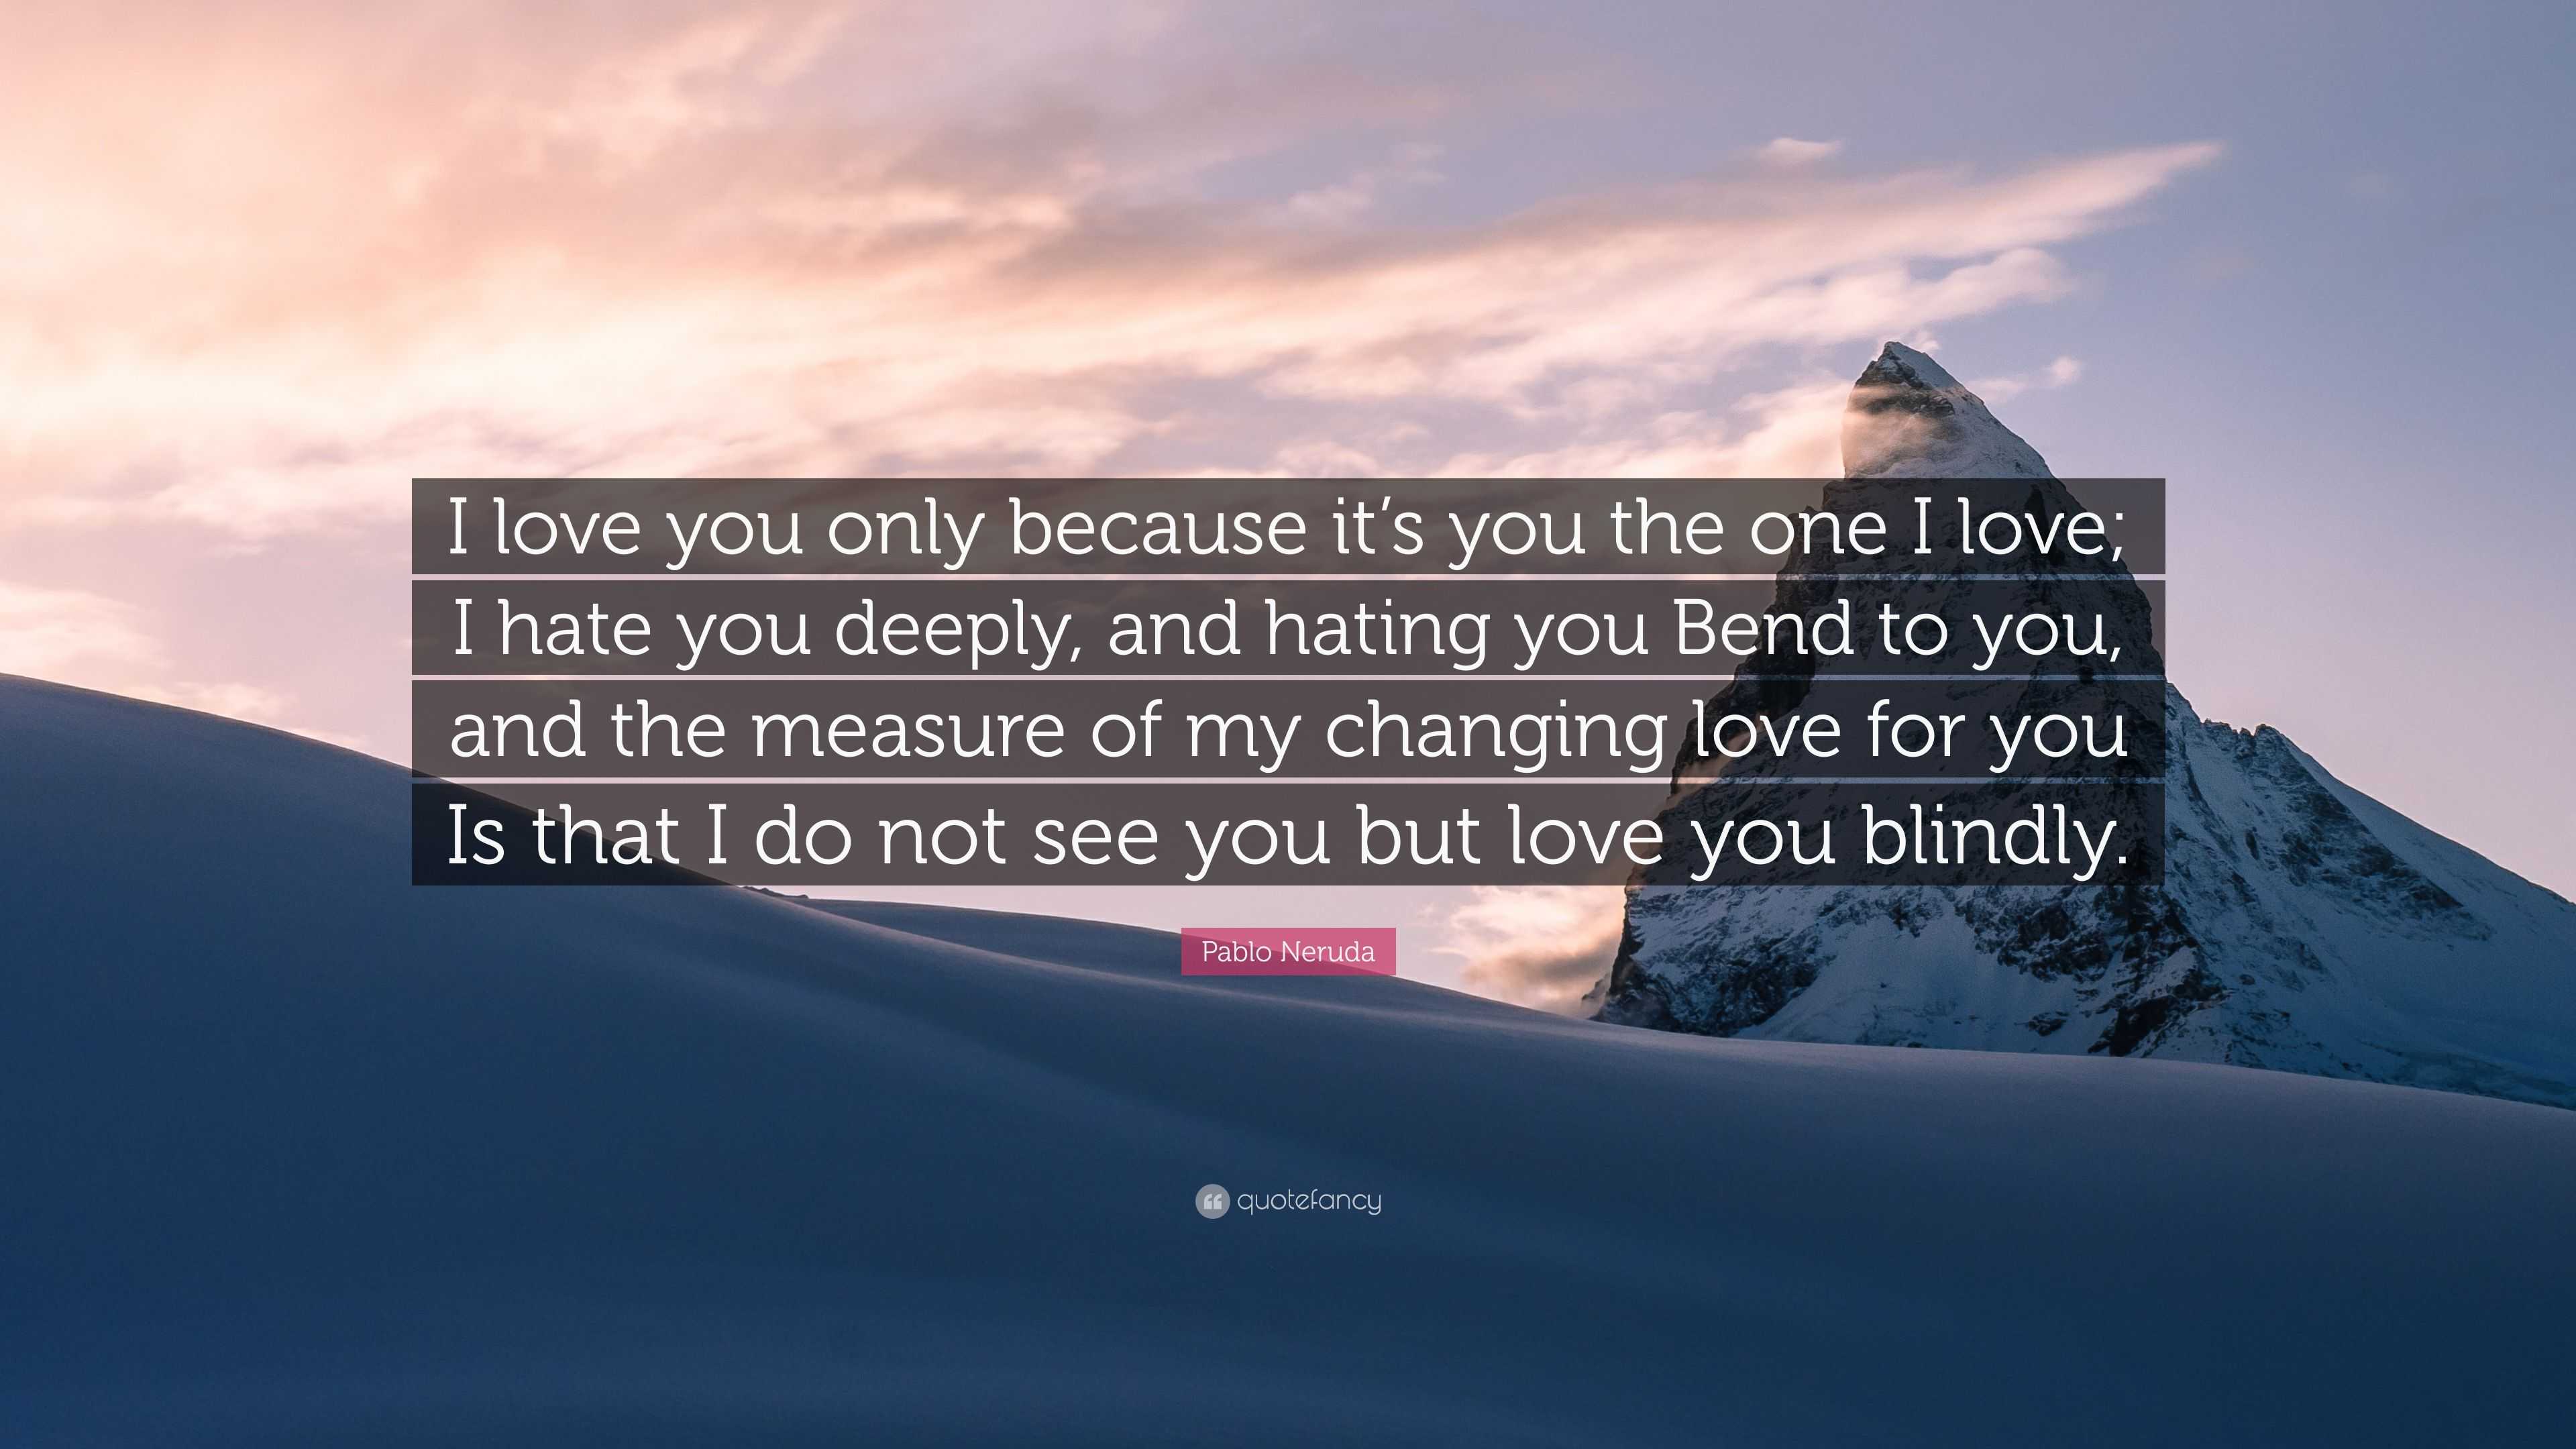 Pablo Neruda Quote: “I love you only because it’s you the one I love; I ...